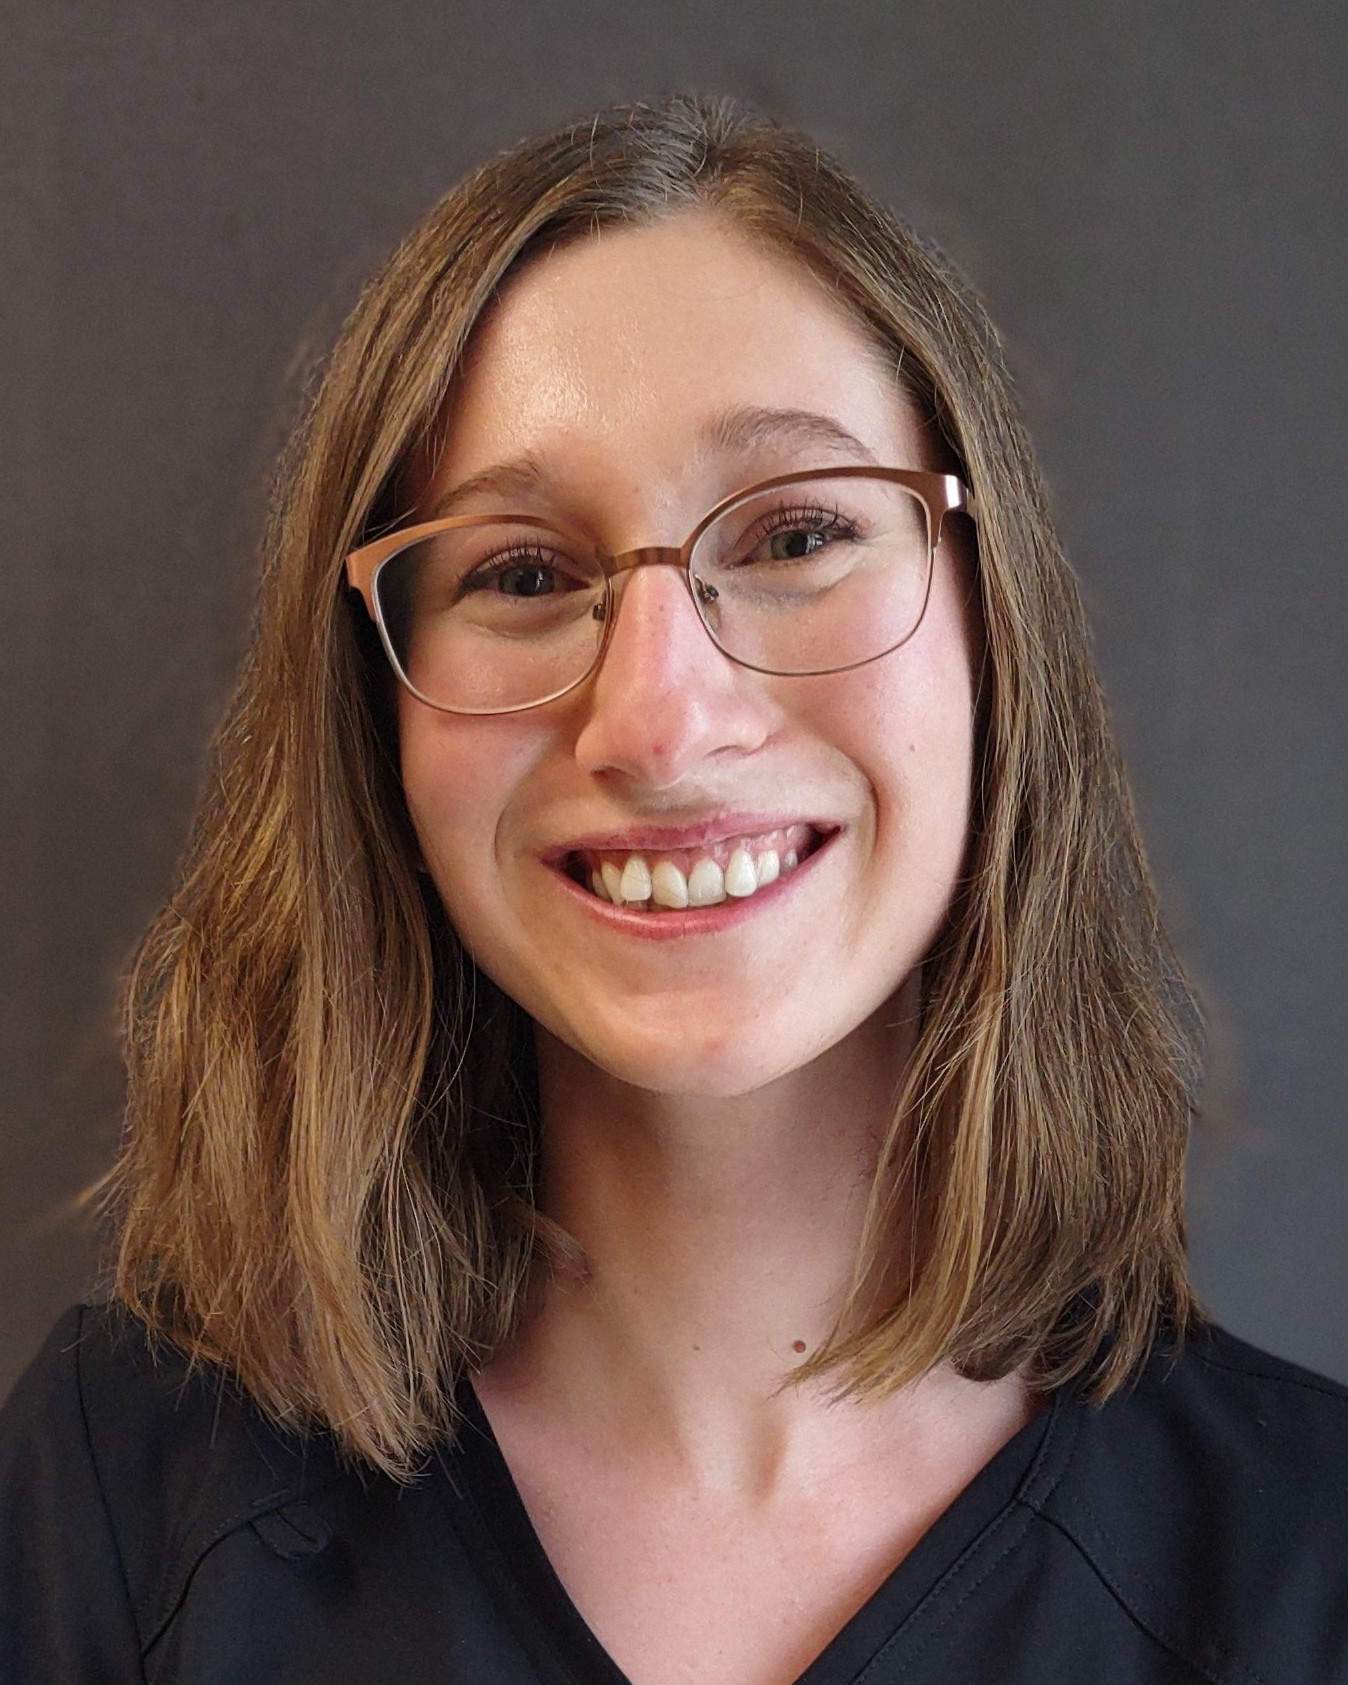 A bespectacled, young white woman with long brown hair all the way up to her elbows